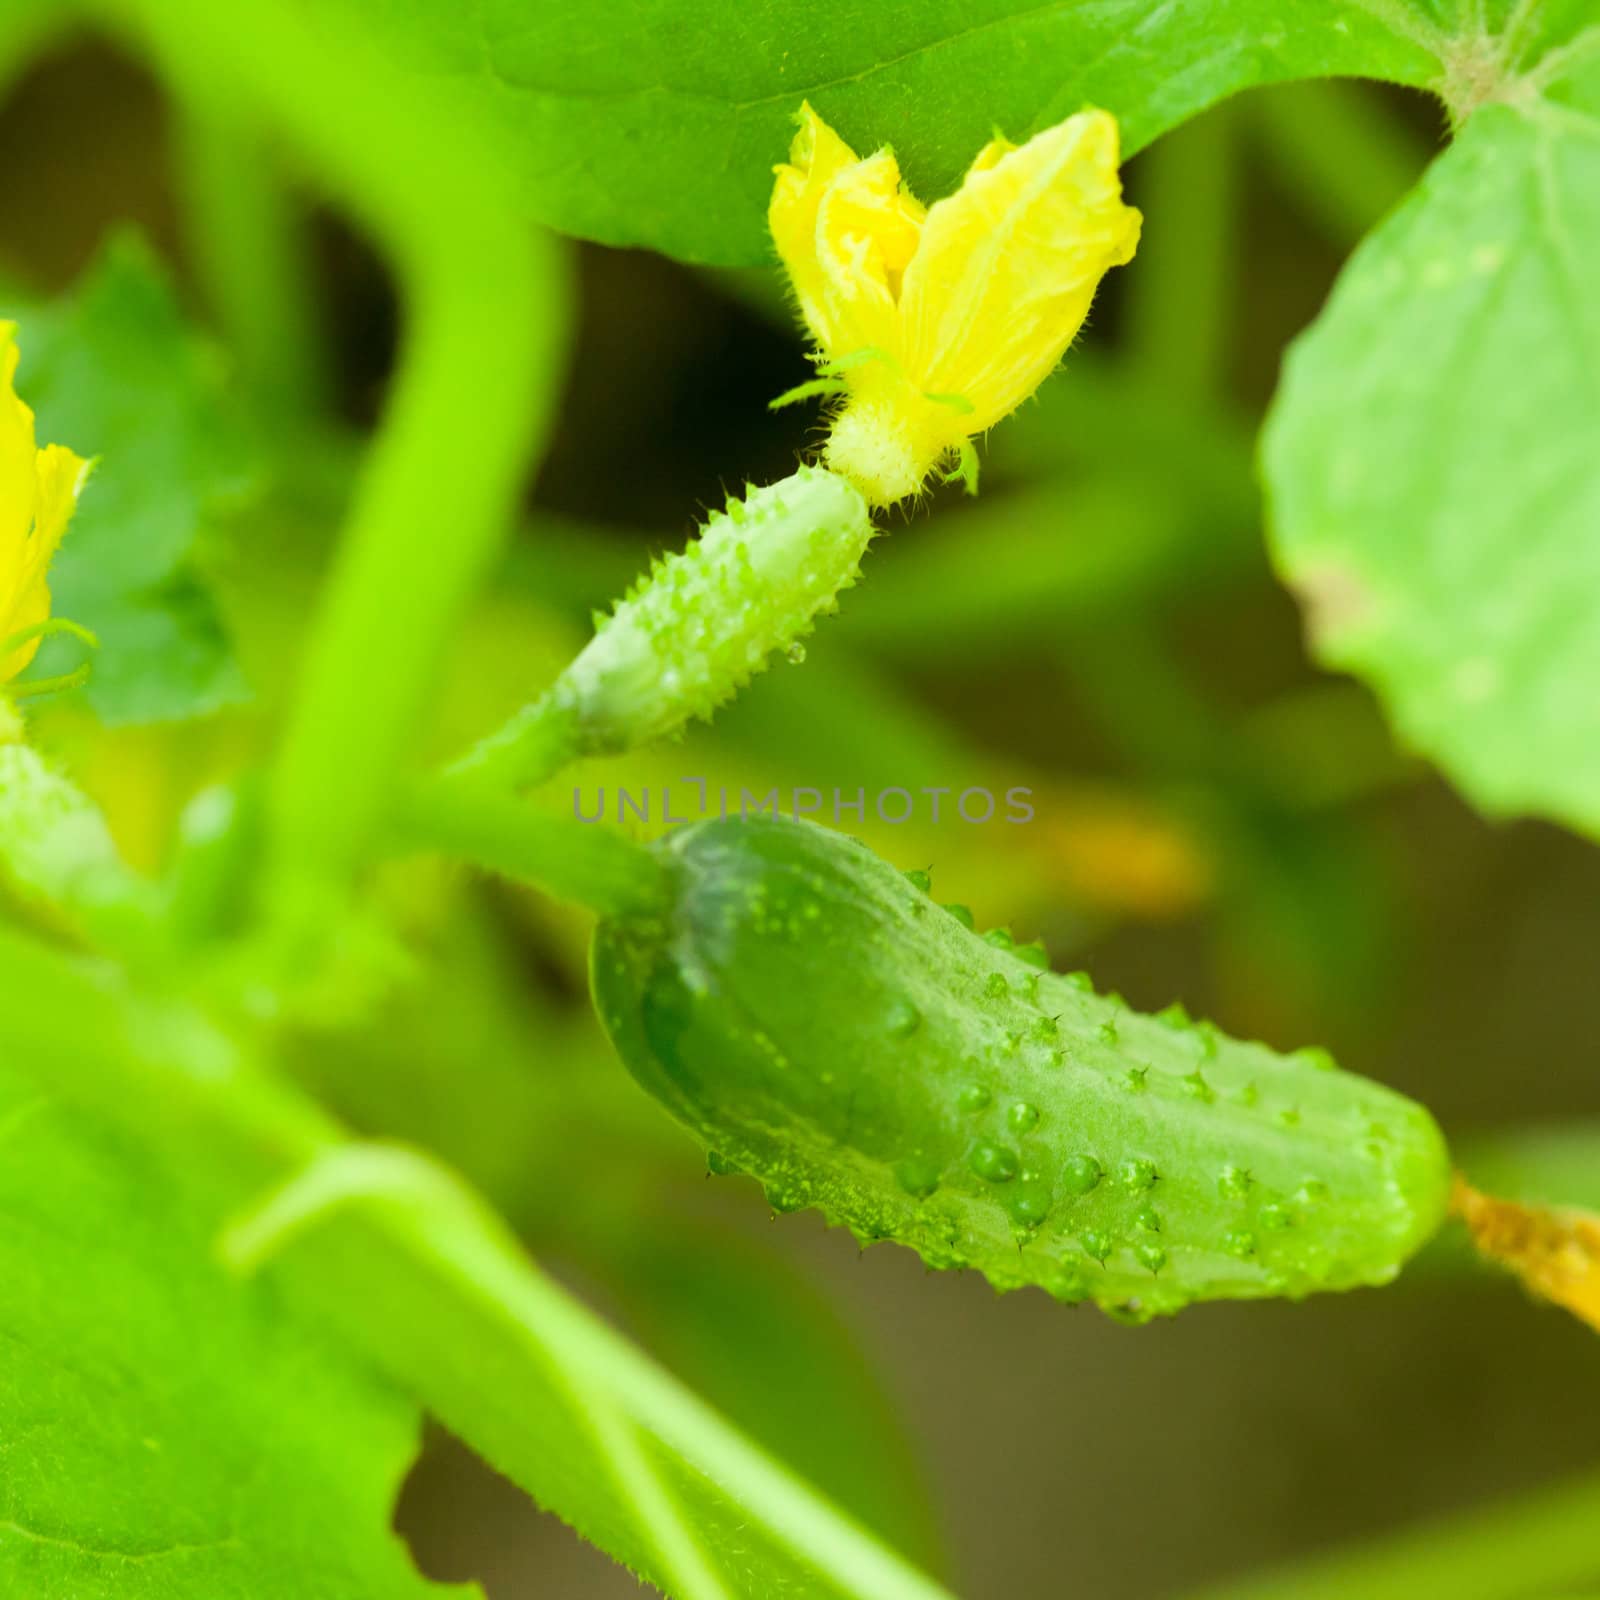 Green cucumbers with flowers